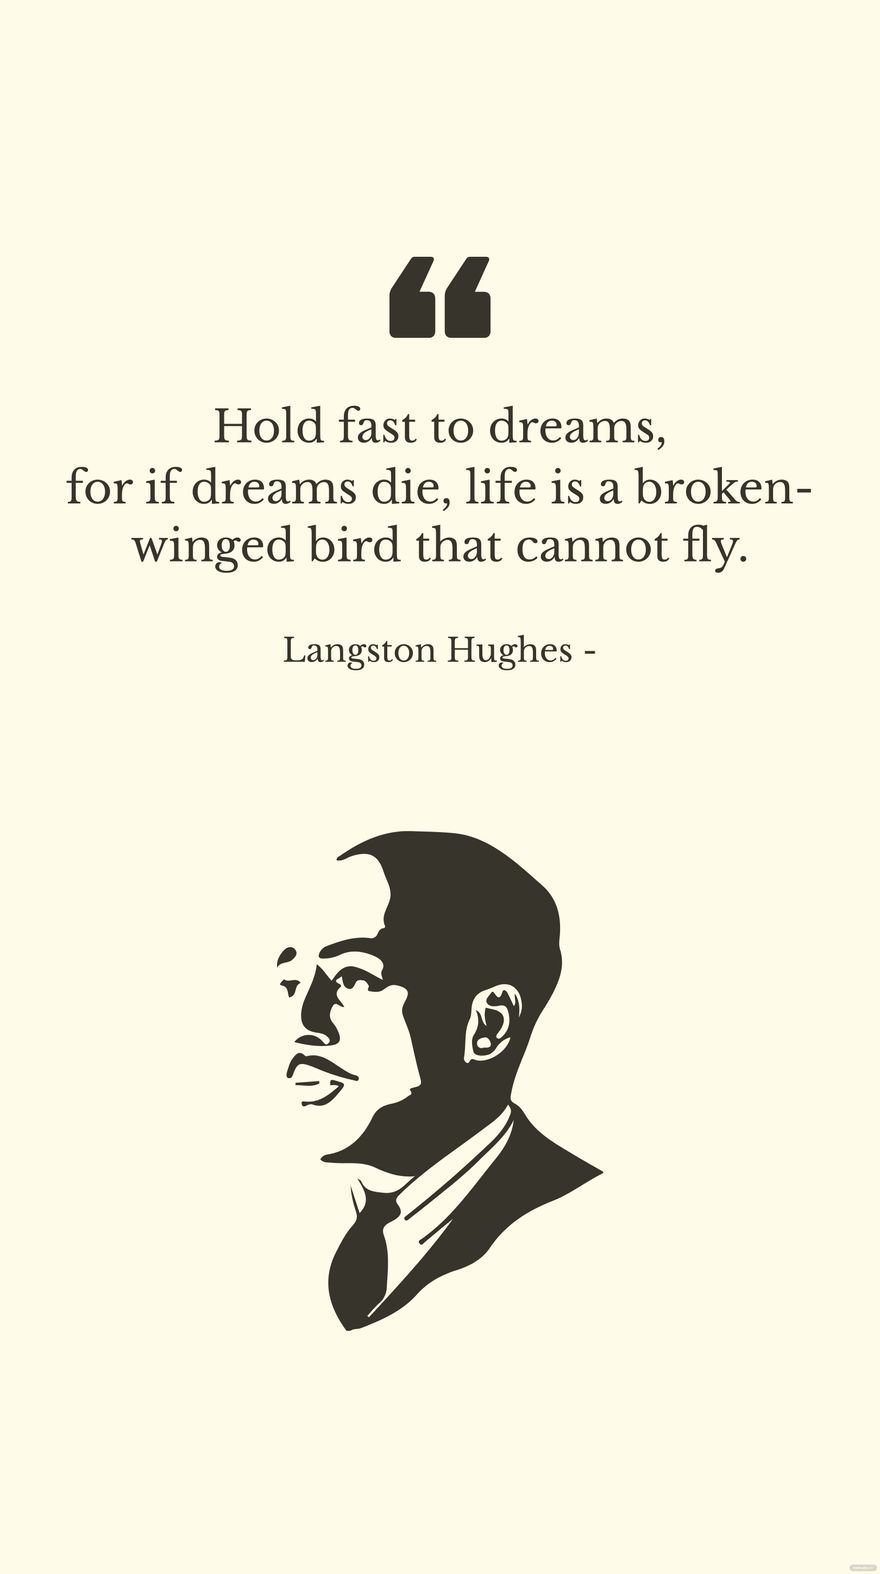 Langston Hughes - Hold fast to dreams, for if dreams die, life is a broken-winged bird that cannot fly.